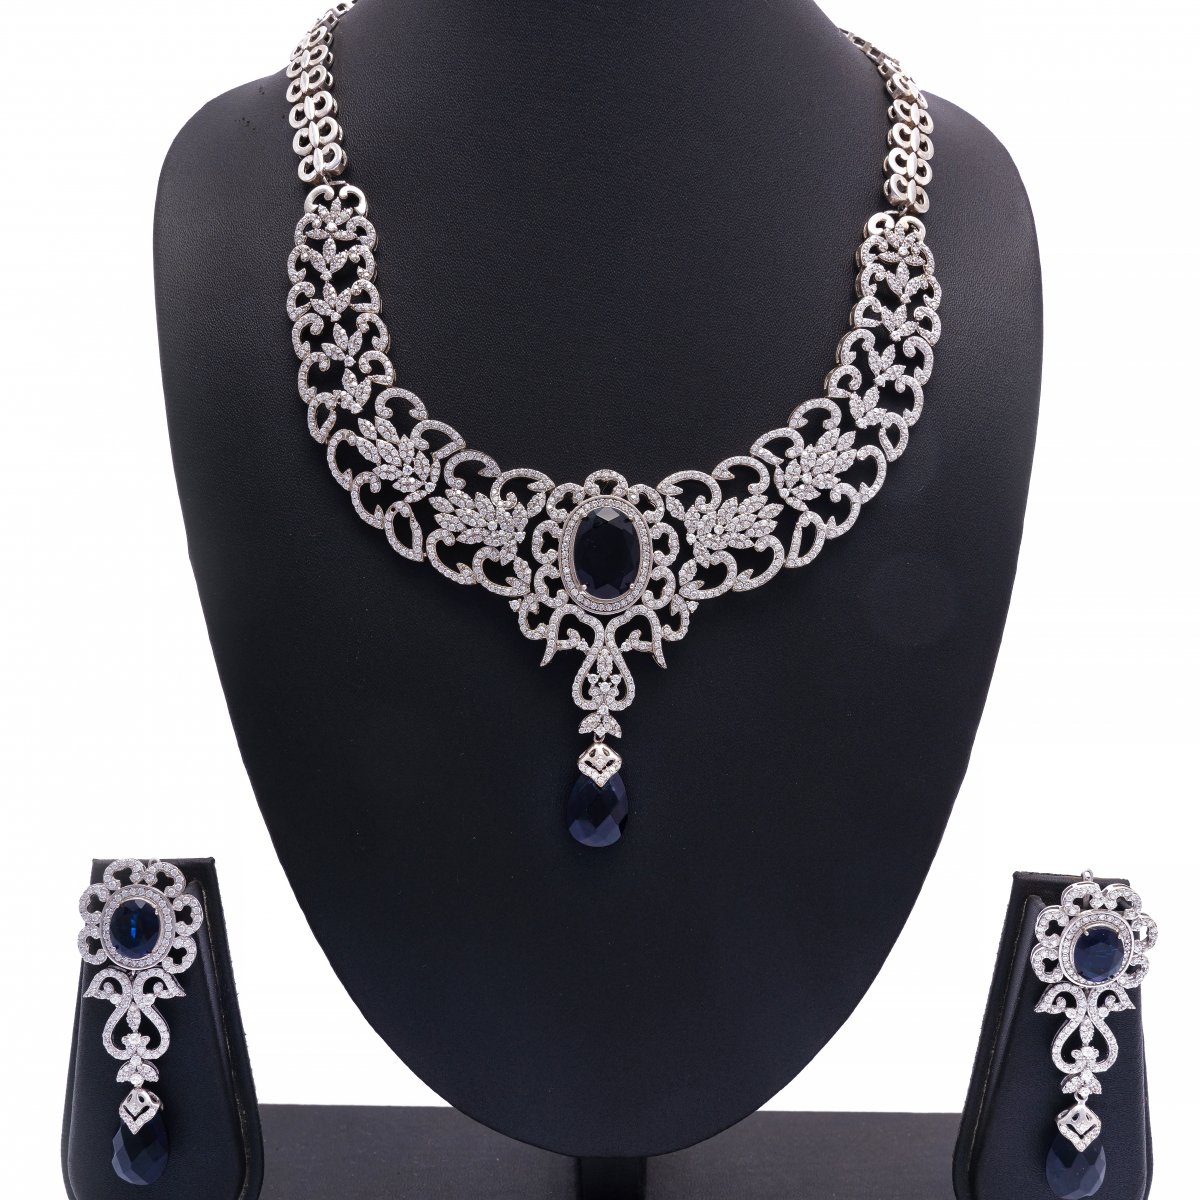 EVENING PARTY SILVER NECKLACE WITH EARRINGS FOR WOMEN 